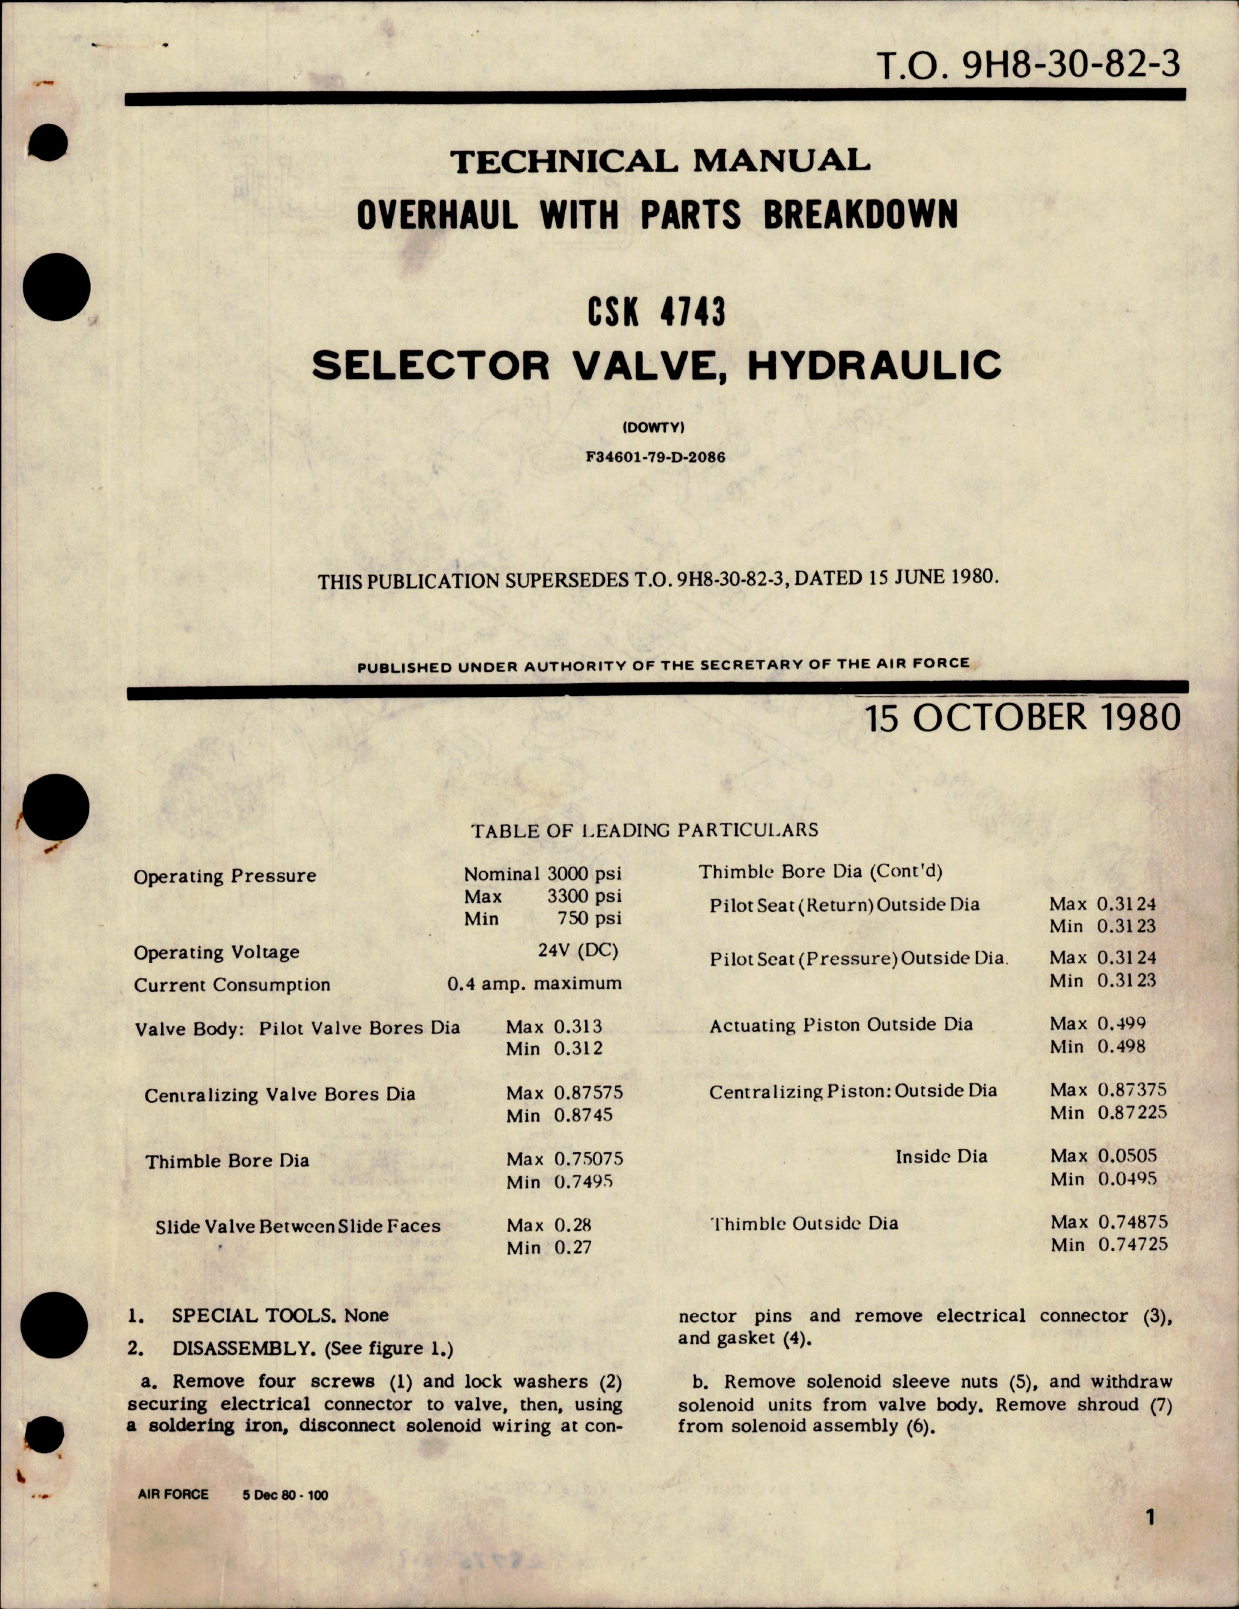 Sample page 1 from AirCorps Library document: Overhaul with Parts Breakdown for Hydraulic Selector Valve - CSK 4743